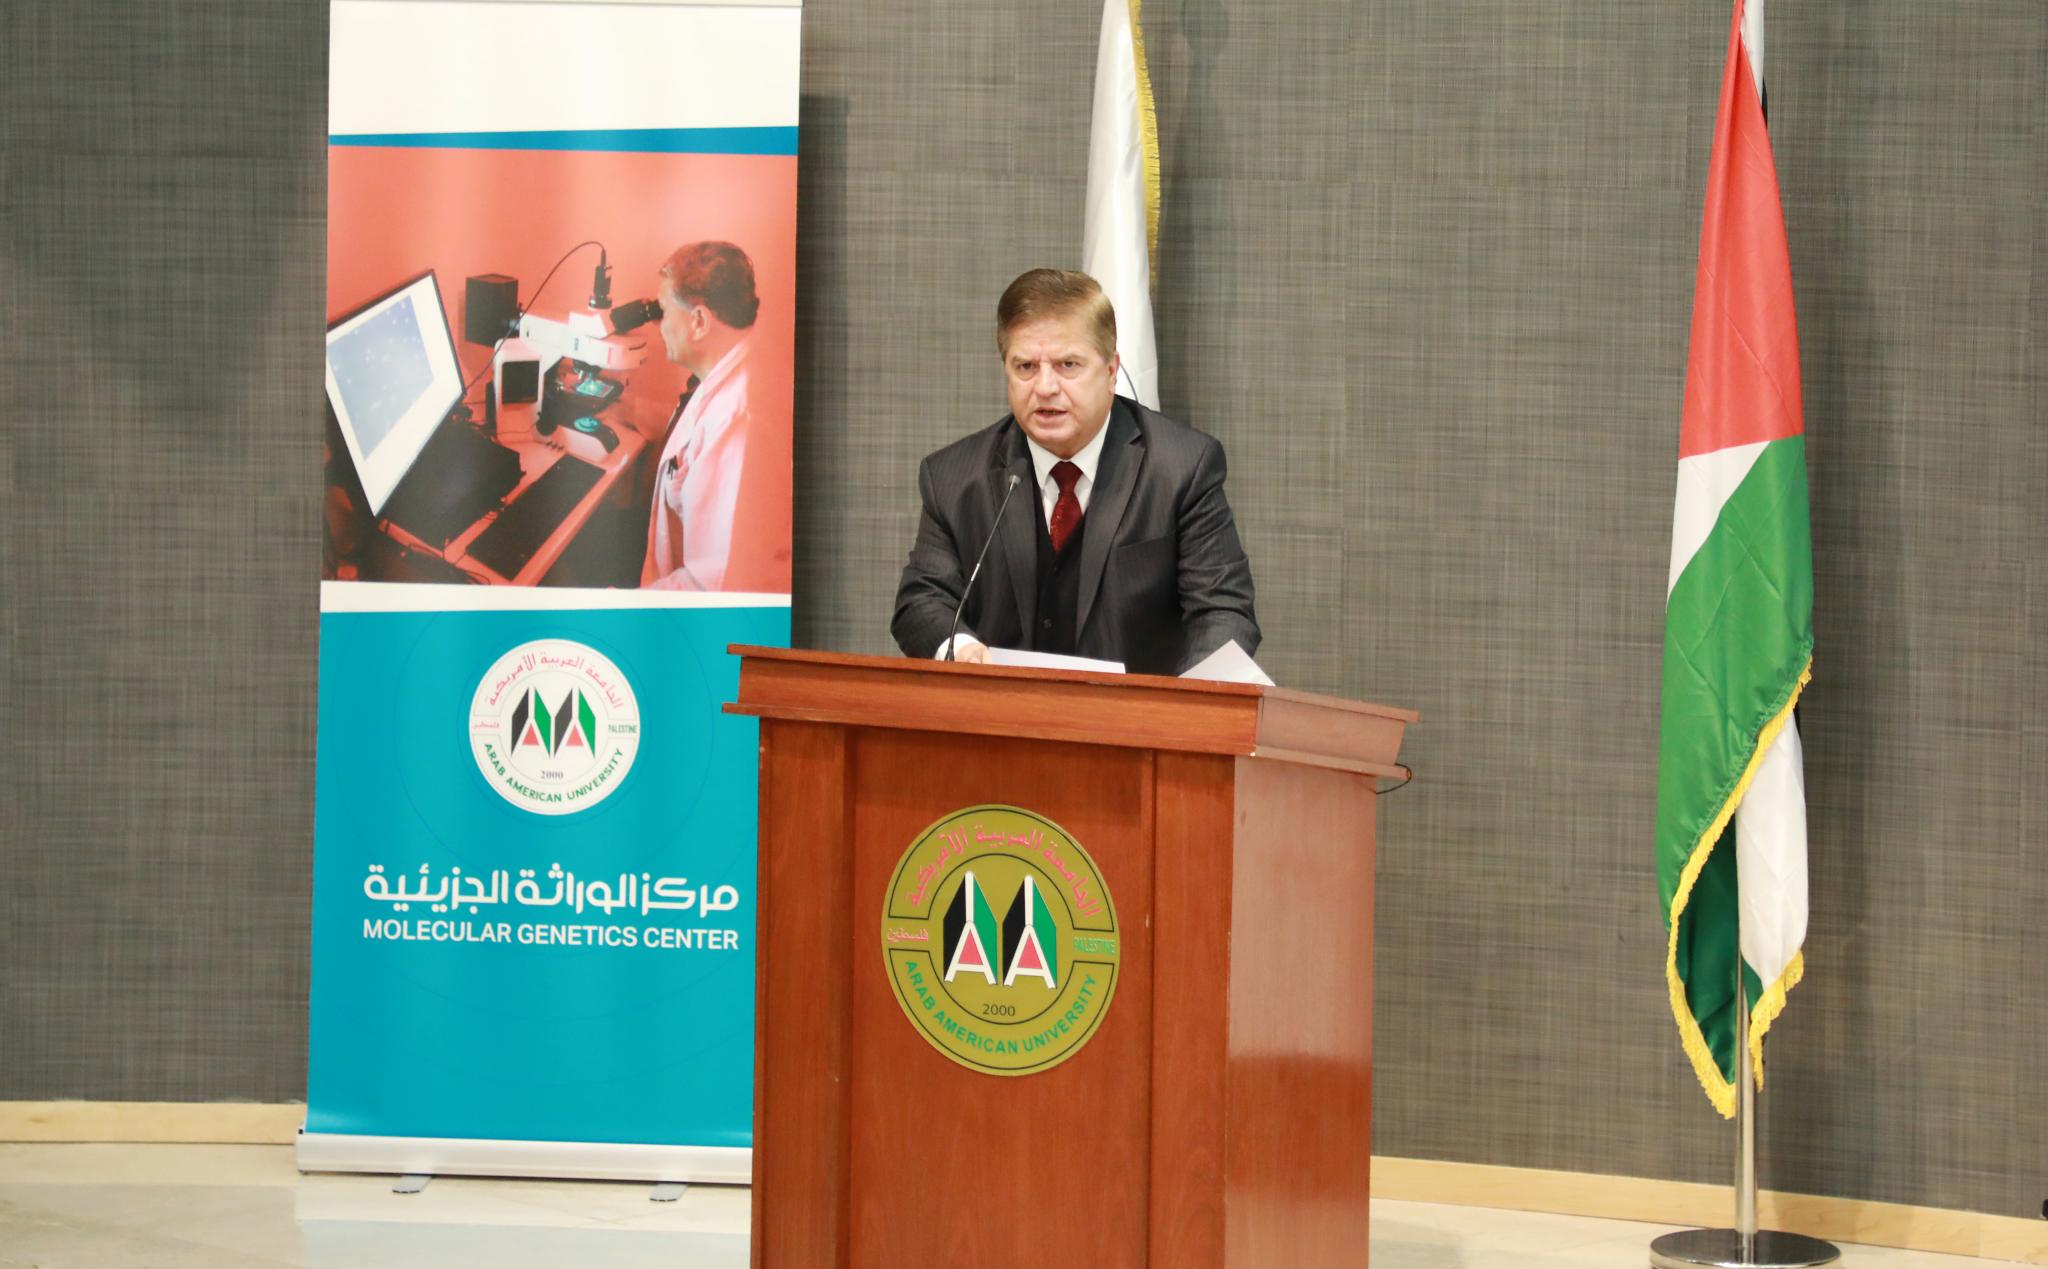 Speech of the Minister of Health